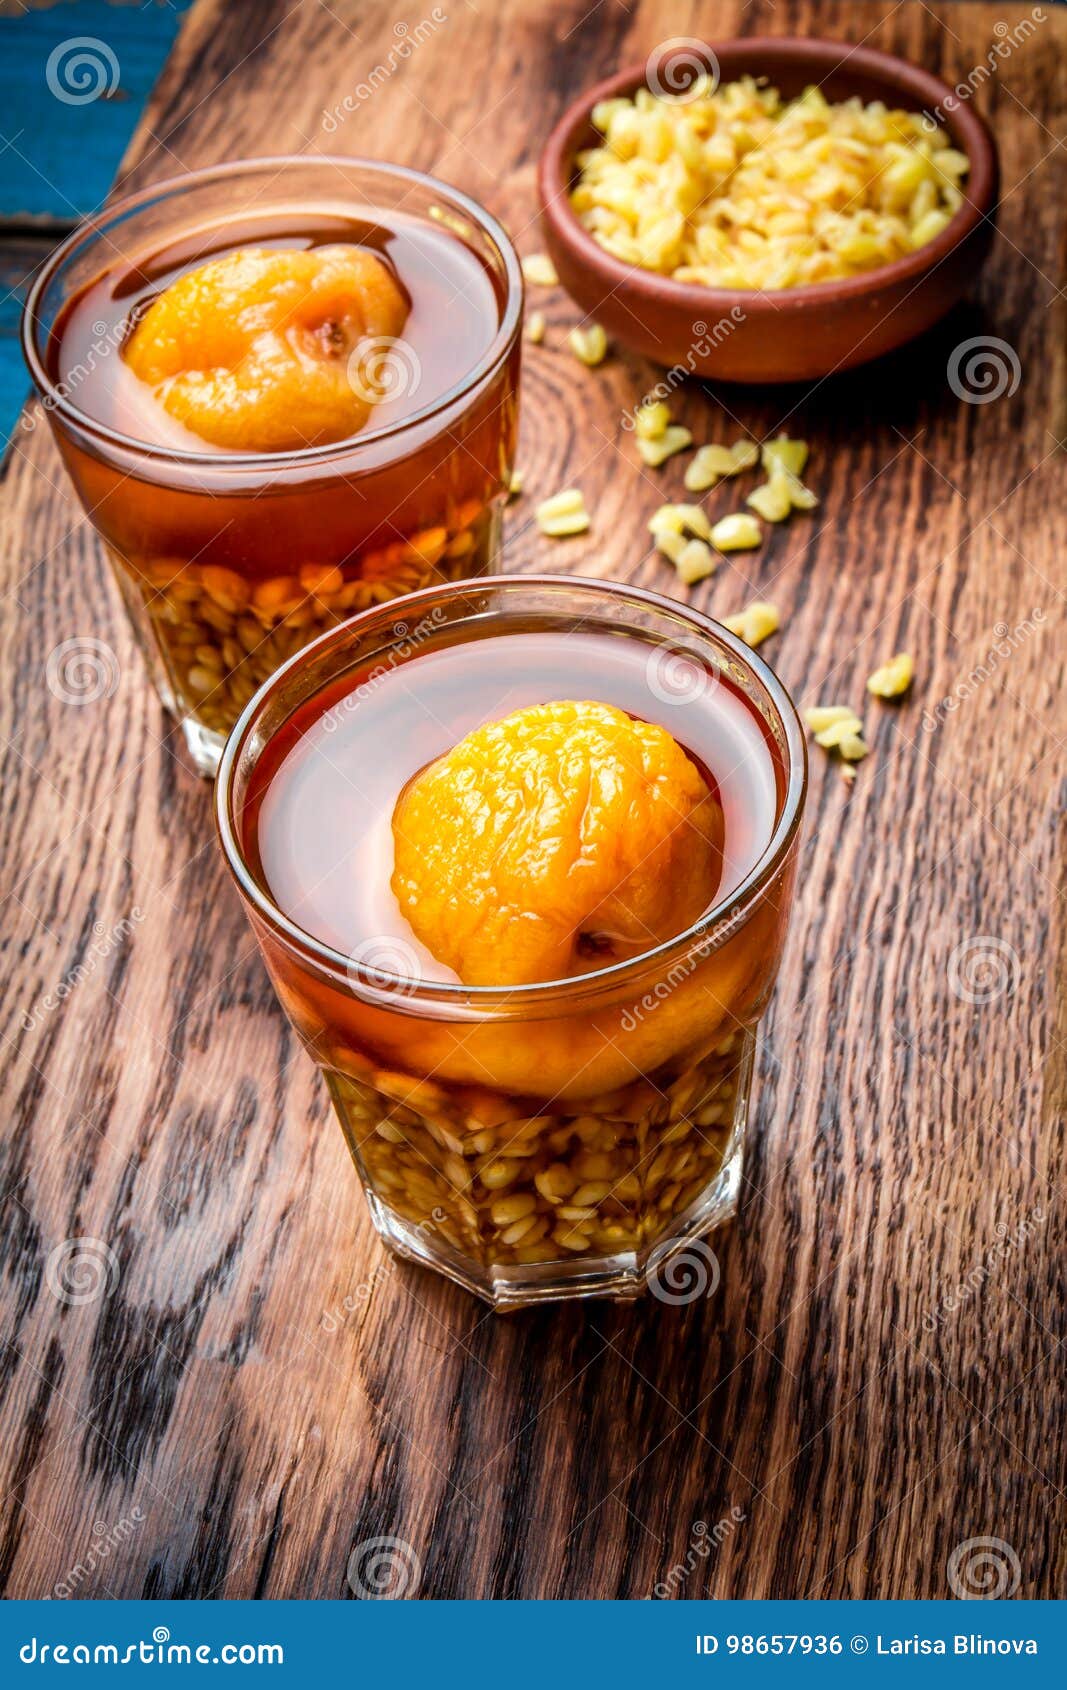 mote con huesillo. traditional chilean drink made from cooked husked wheat and dried peach on wooden board, rustic blue